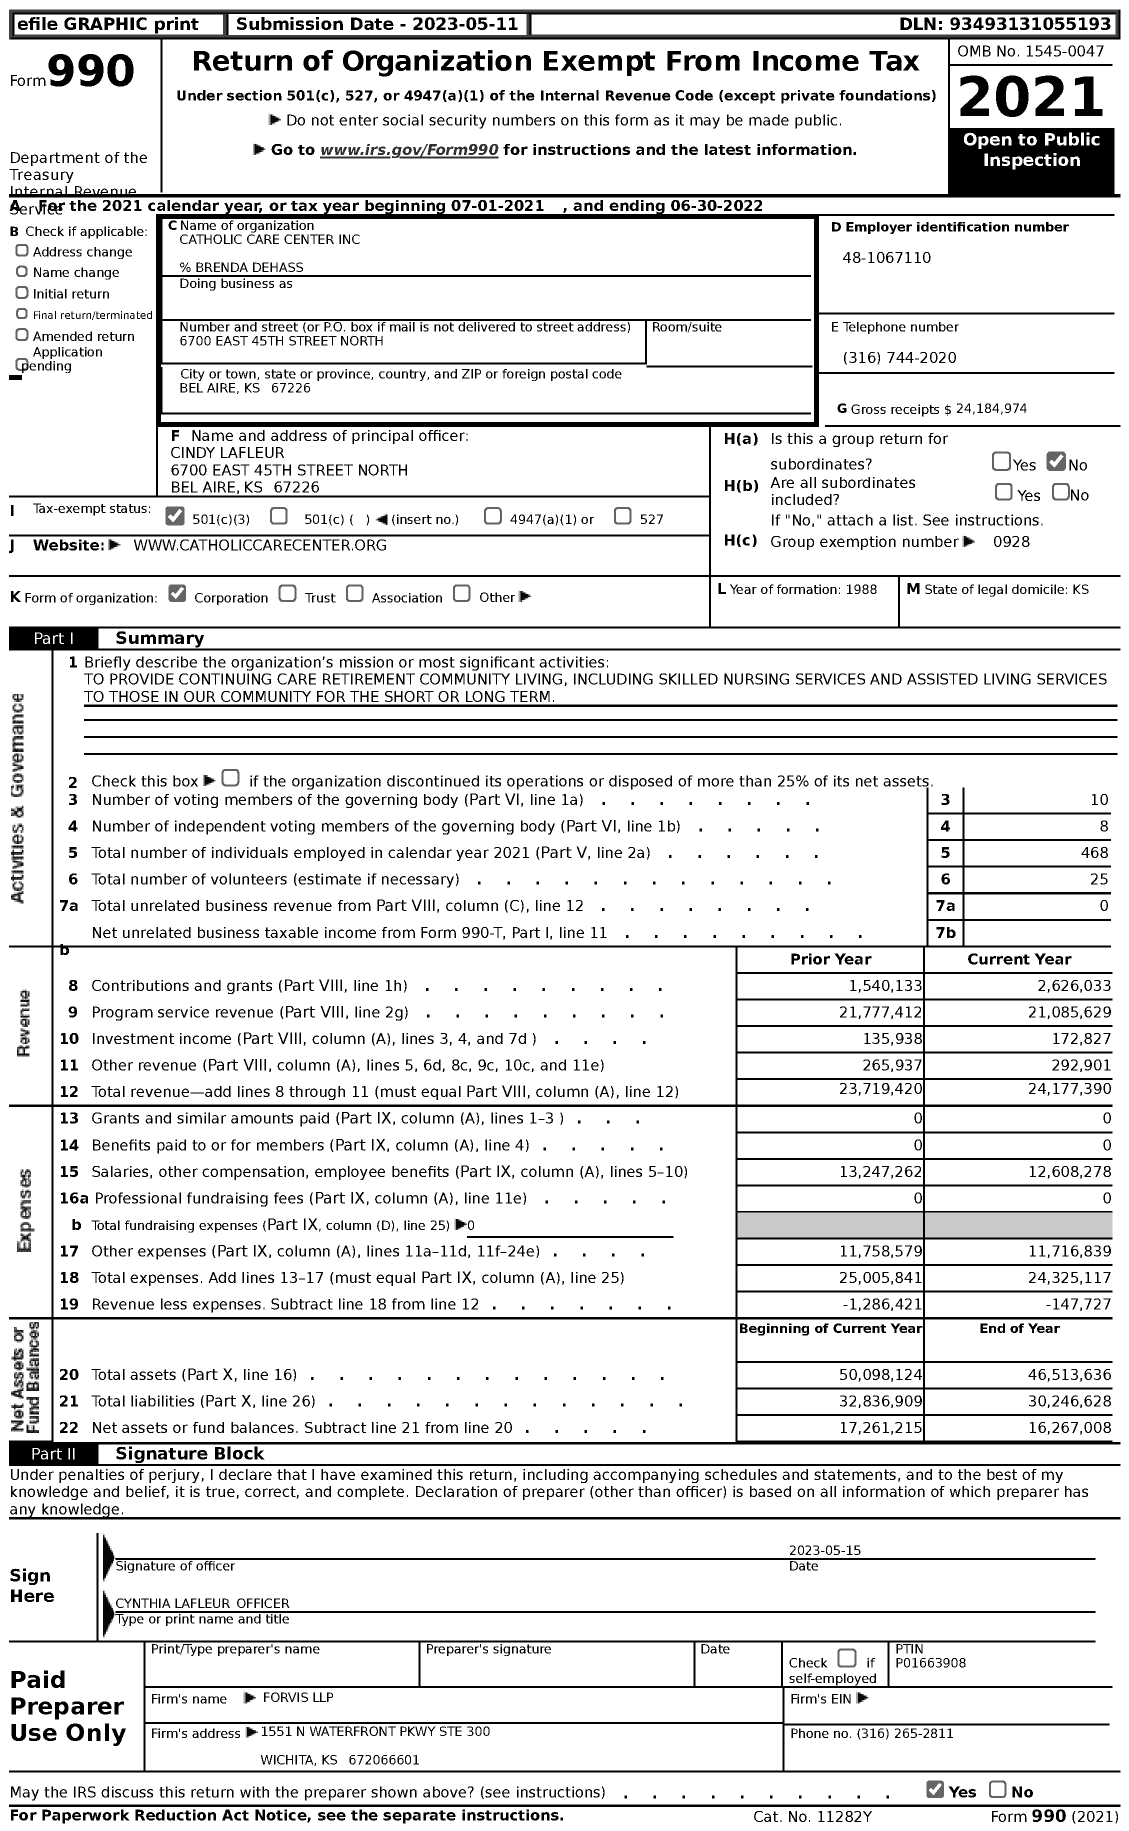 Image of first page of 2021 Form 990 for Catholic Care Center